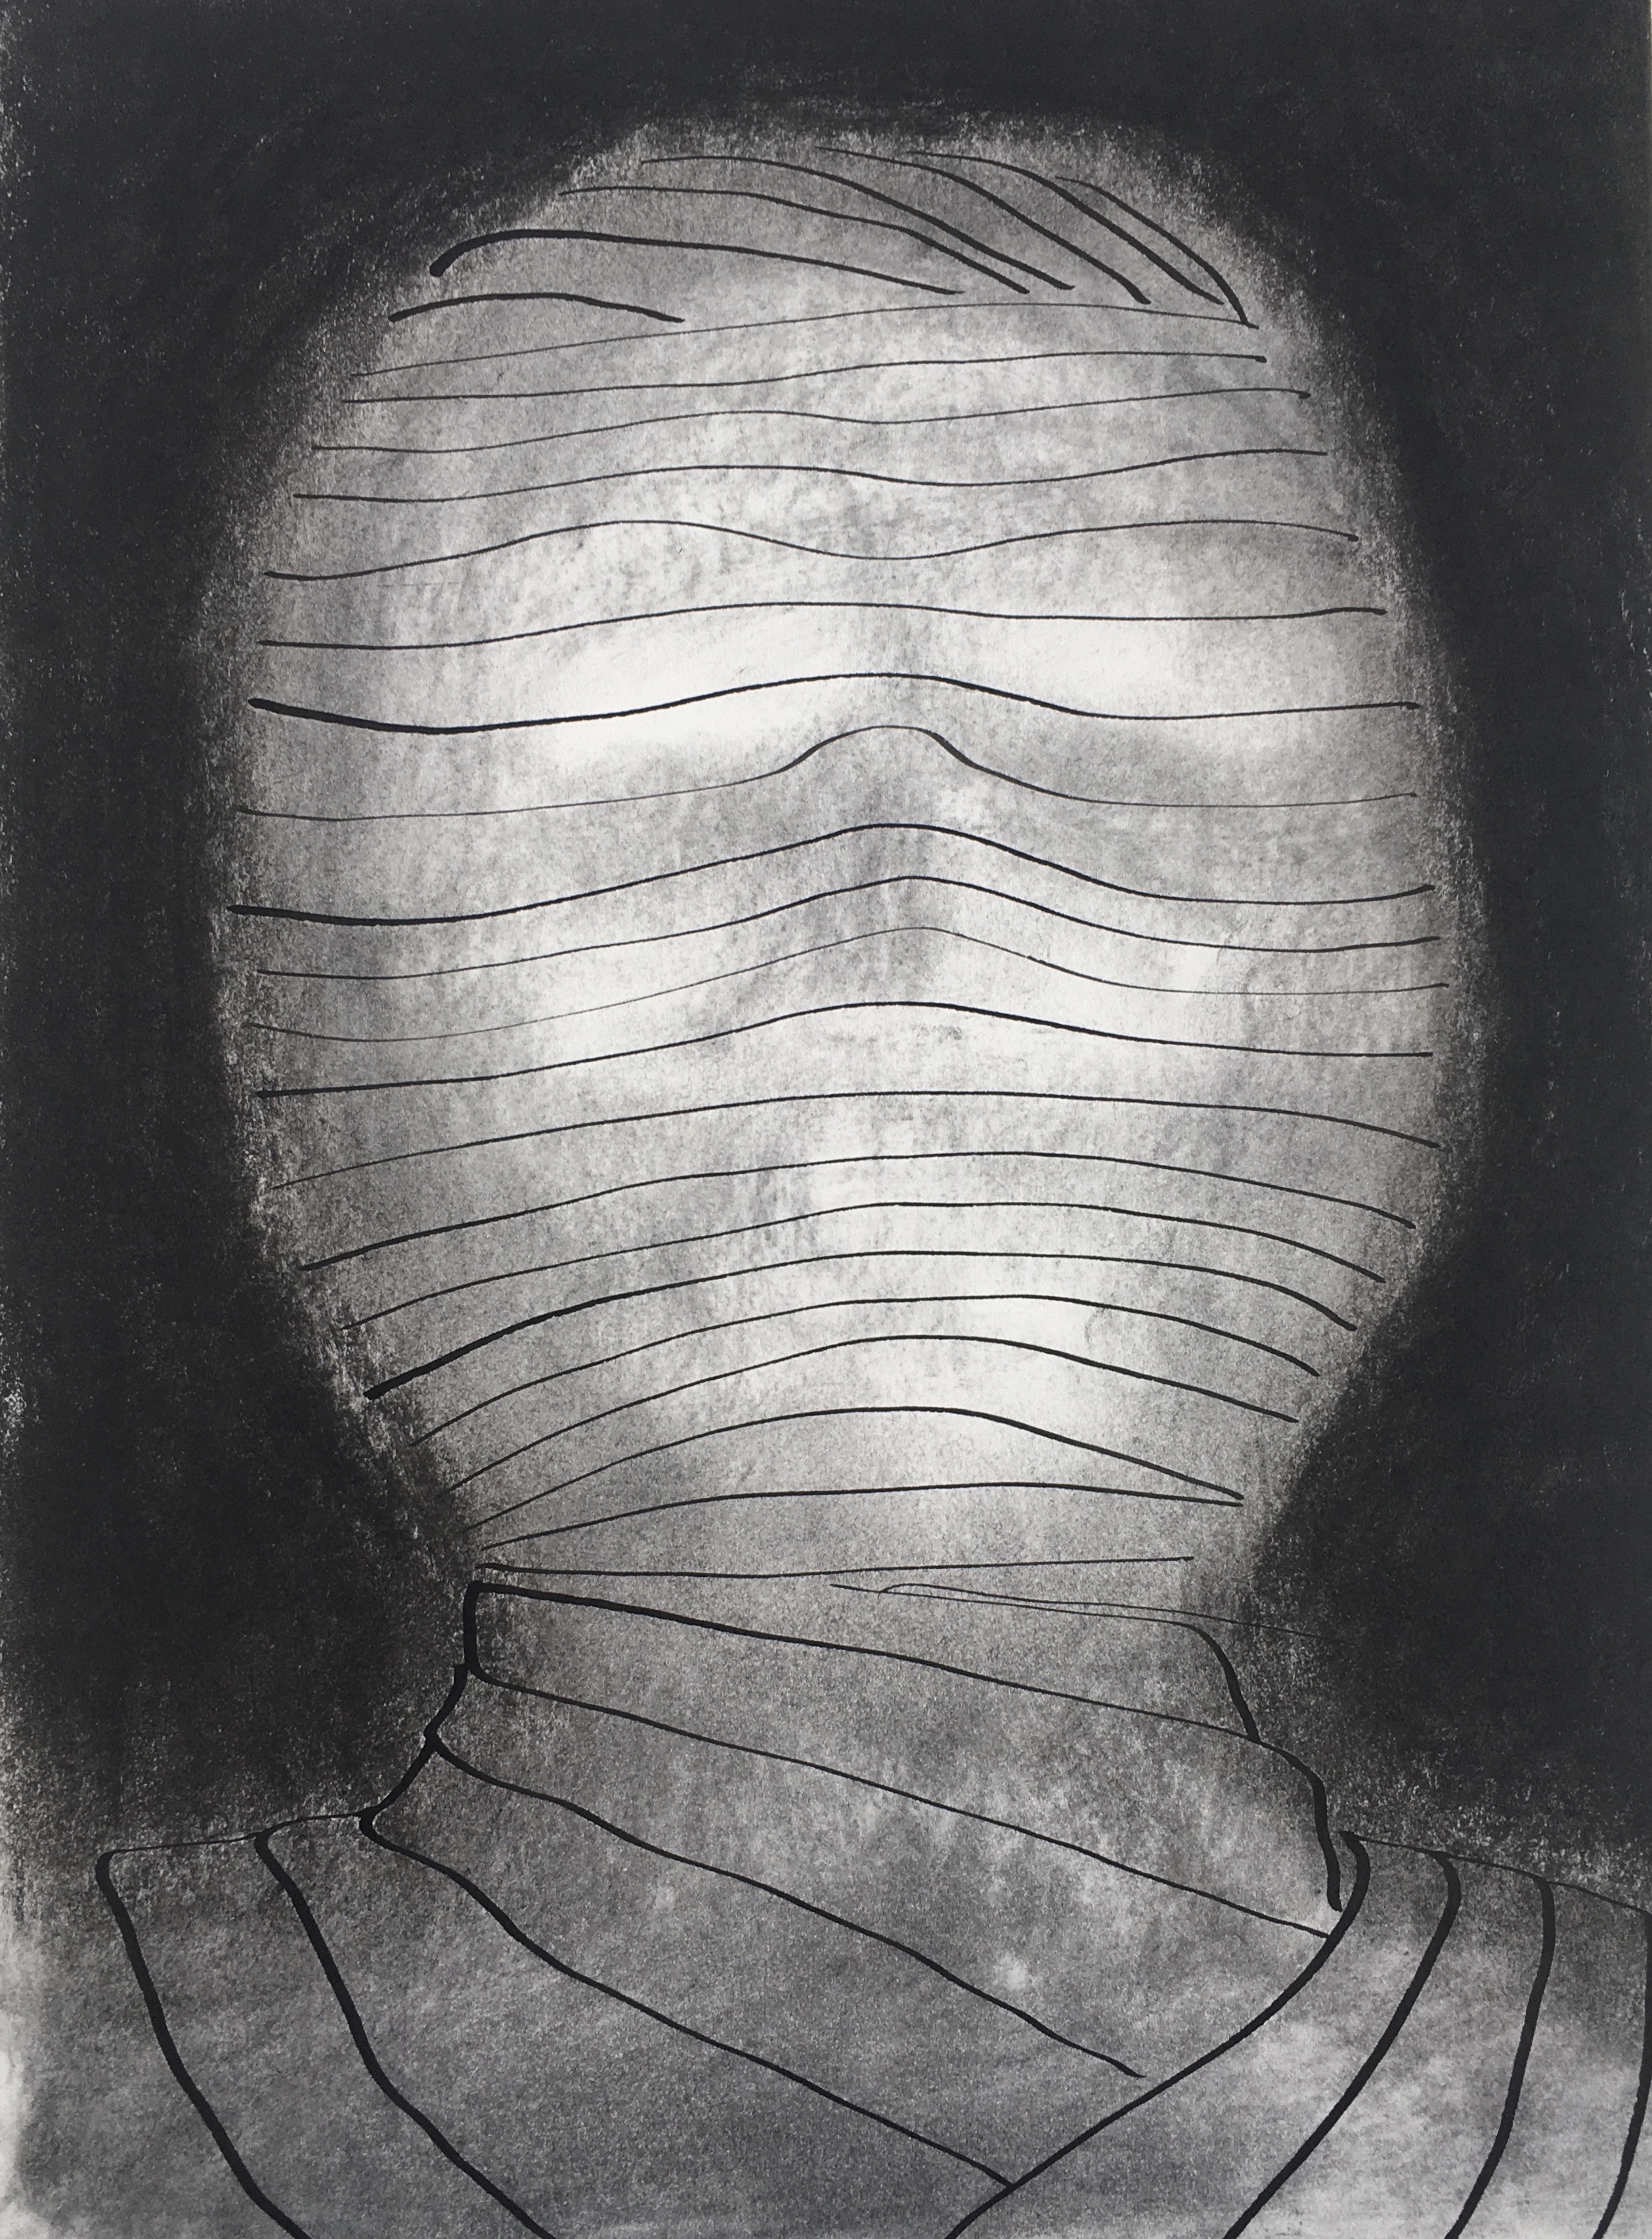 The Mummy, 1990
Charcoal and Ink on Paper, Walli White, artist